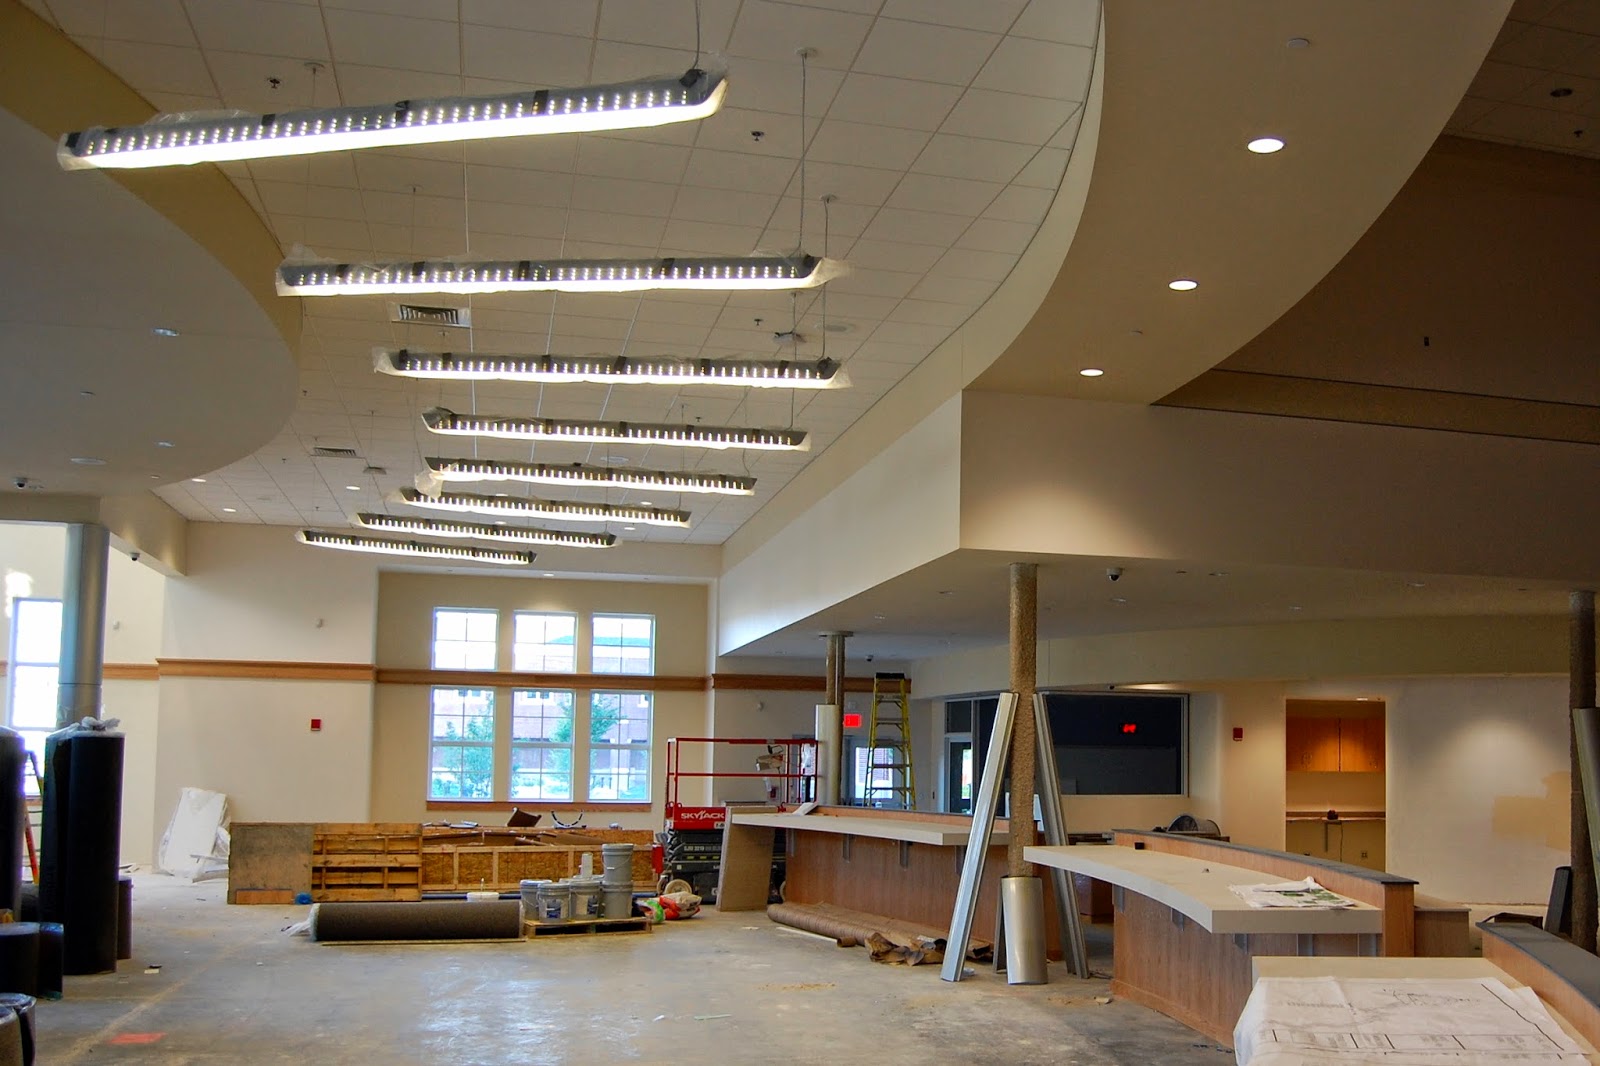 from the front/main entrance looking to the Library/Media Center